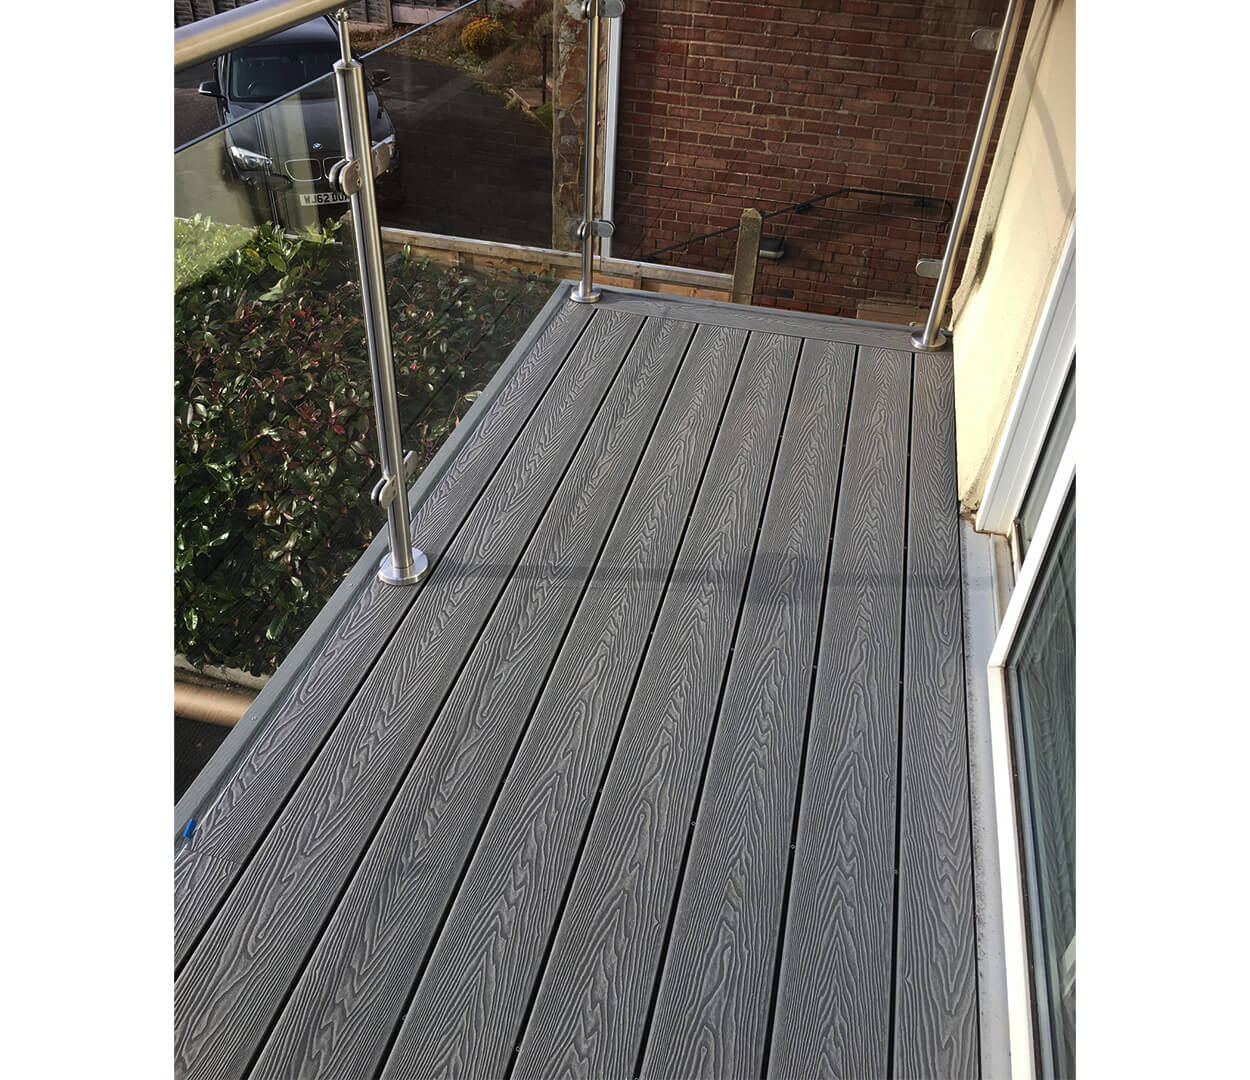 Cladco Woodgrain Decking Boards in Stone Grey complete this balcony 